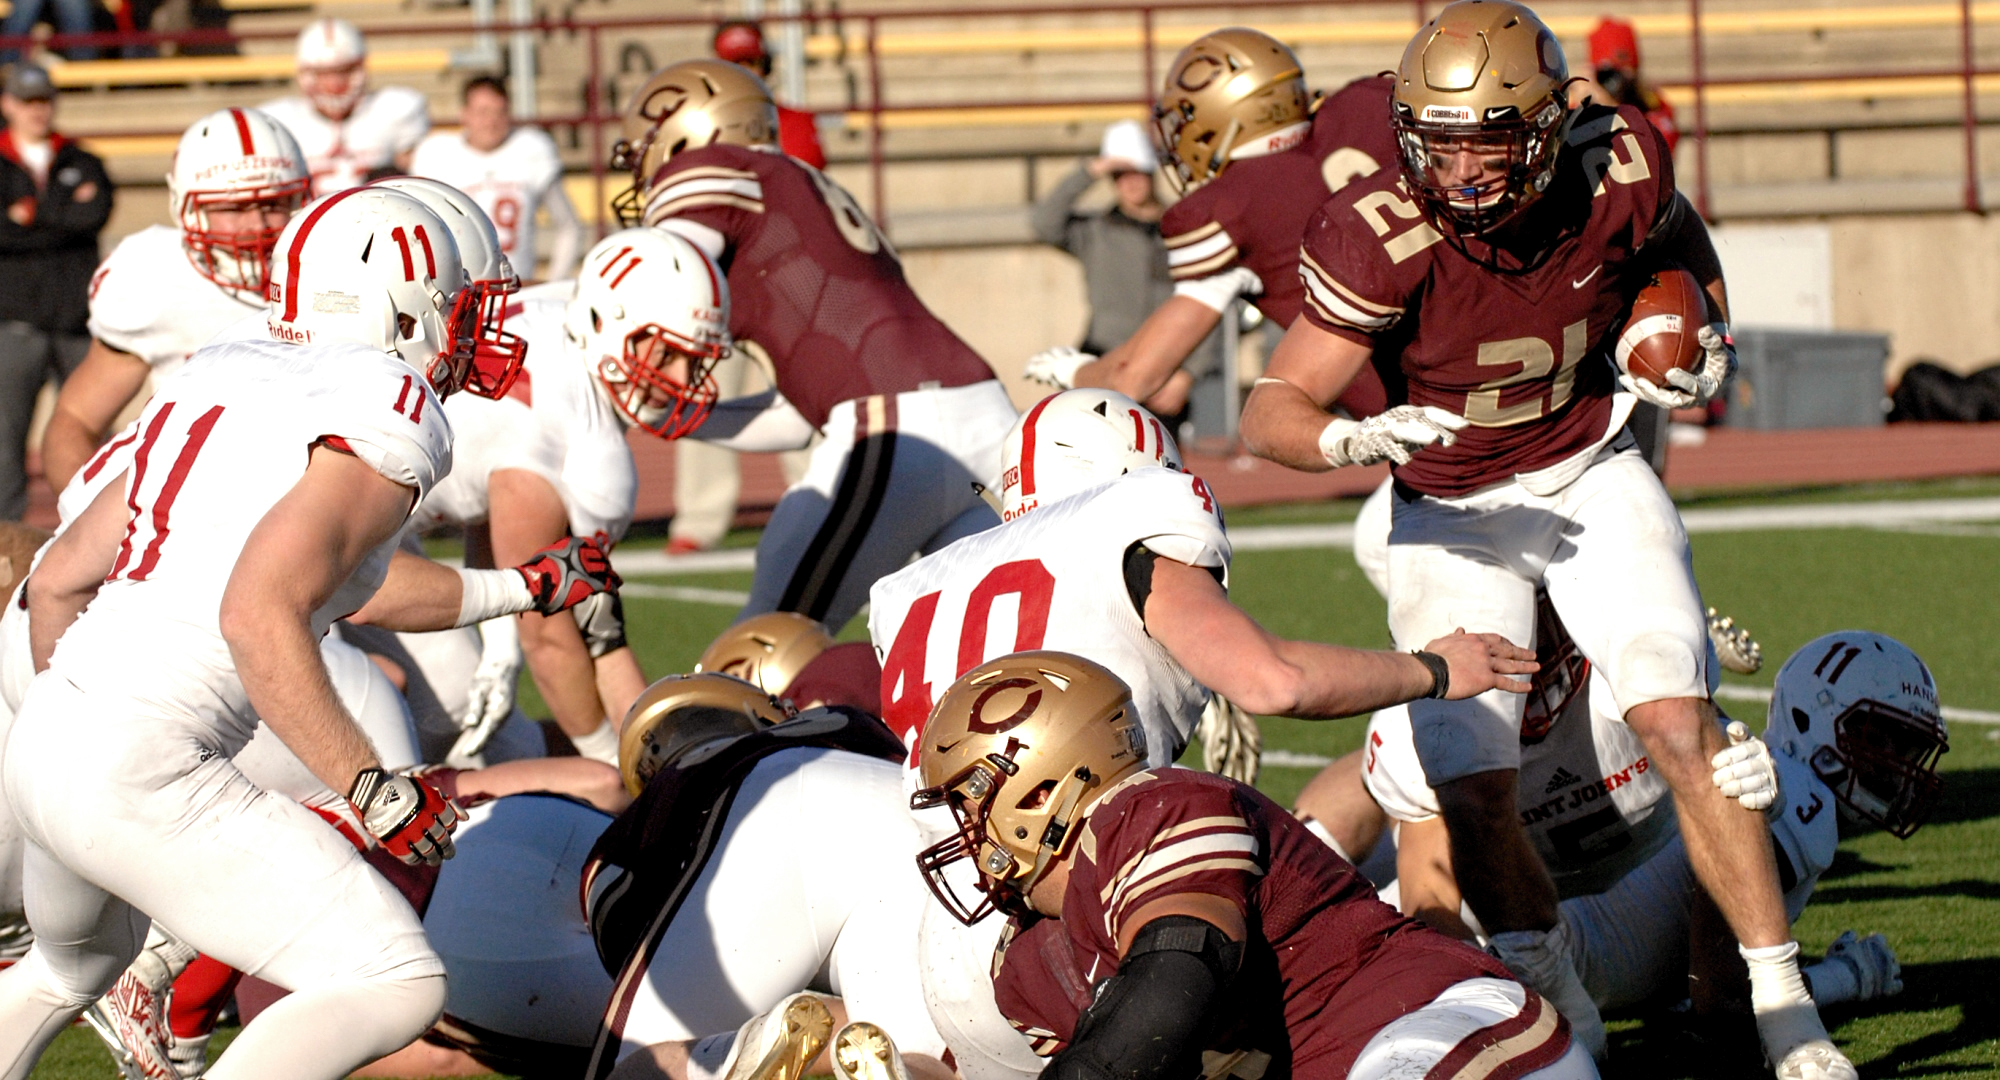 Junior Chad Johnson weaves his way through the defense in the Cobbers' regular-season finale. He finished with 103 rushing yards.